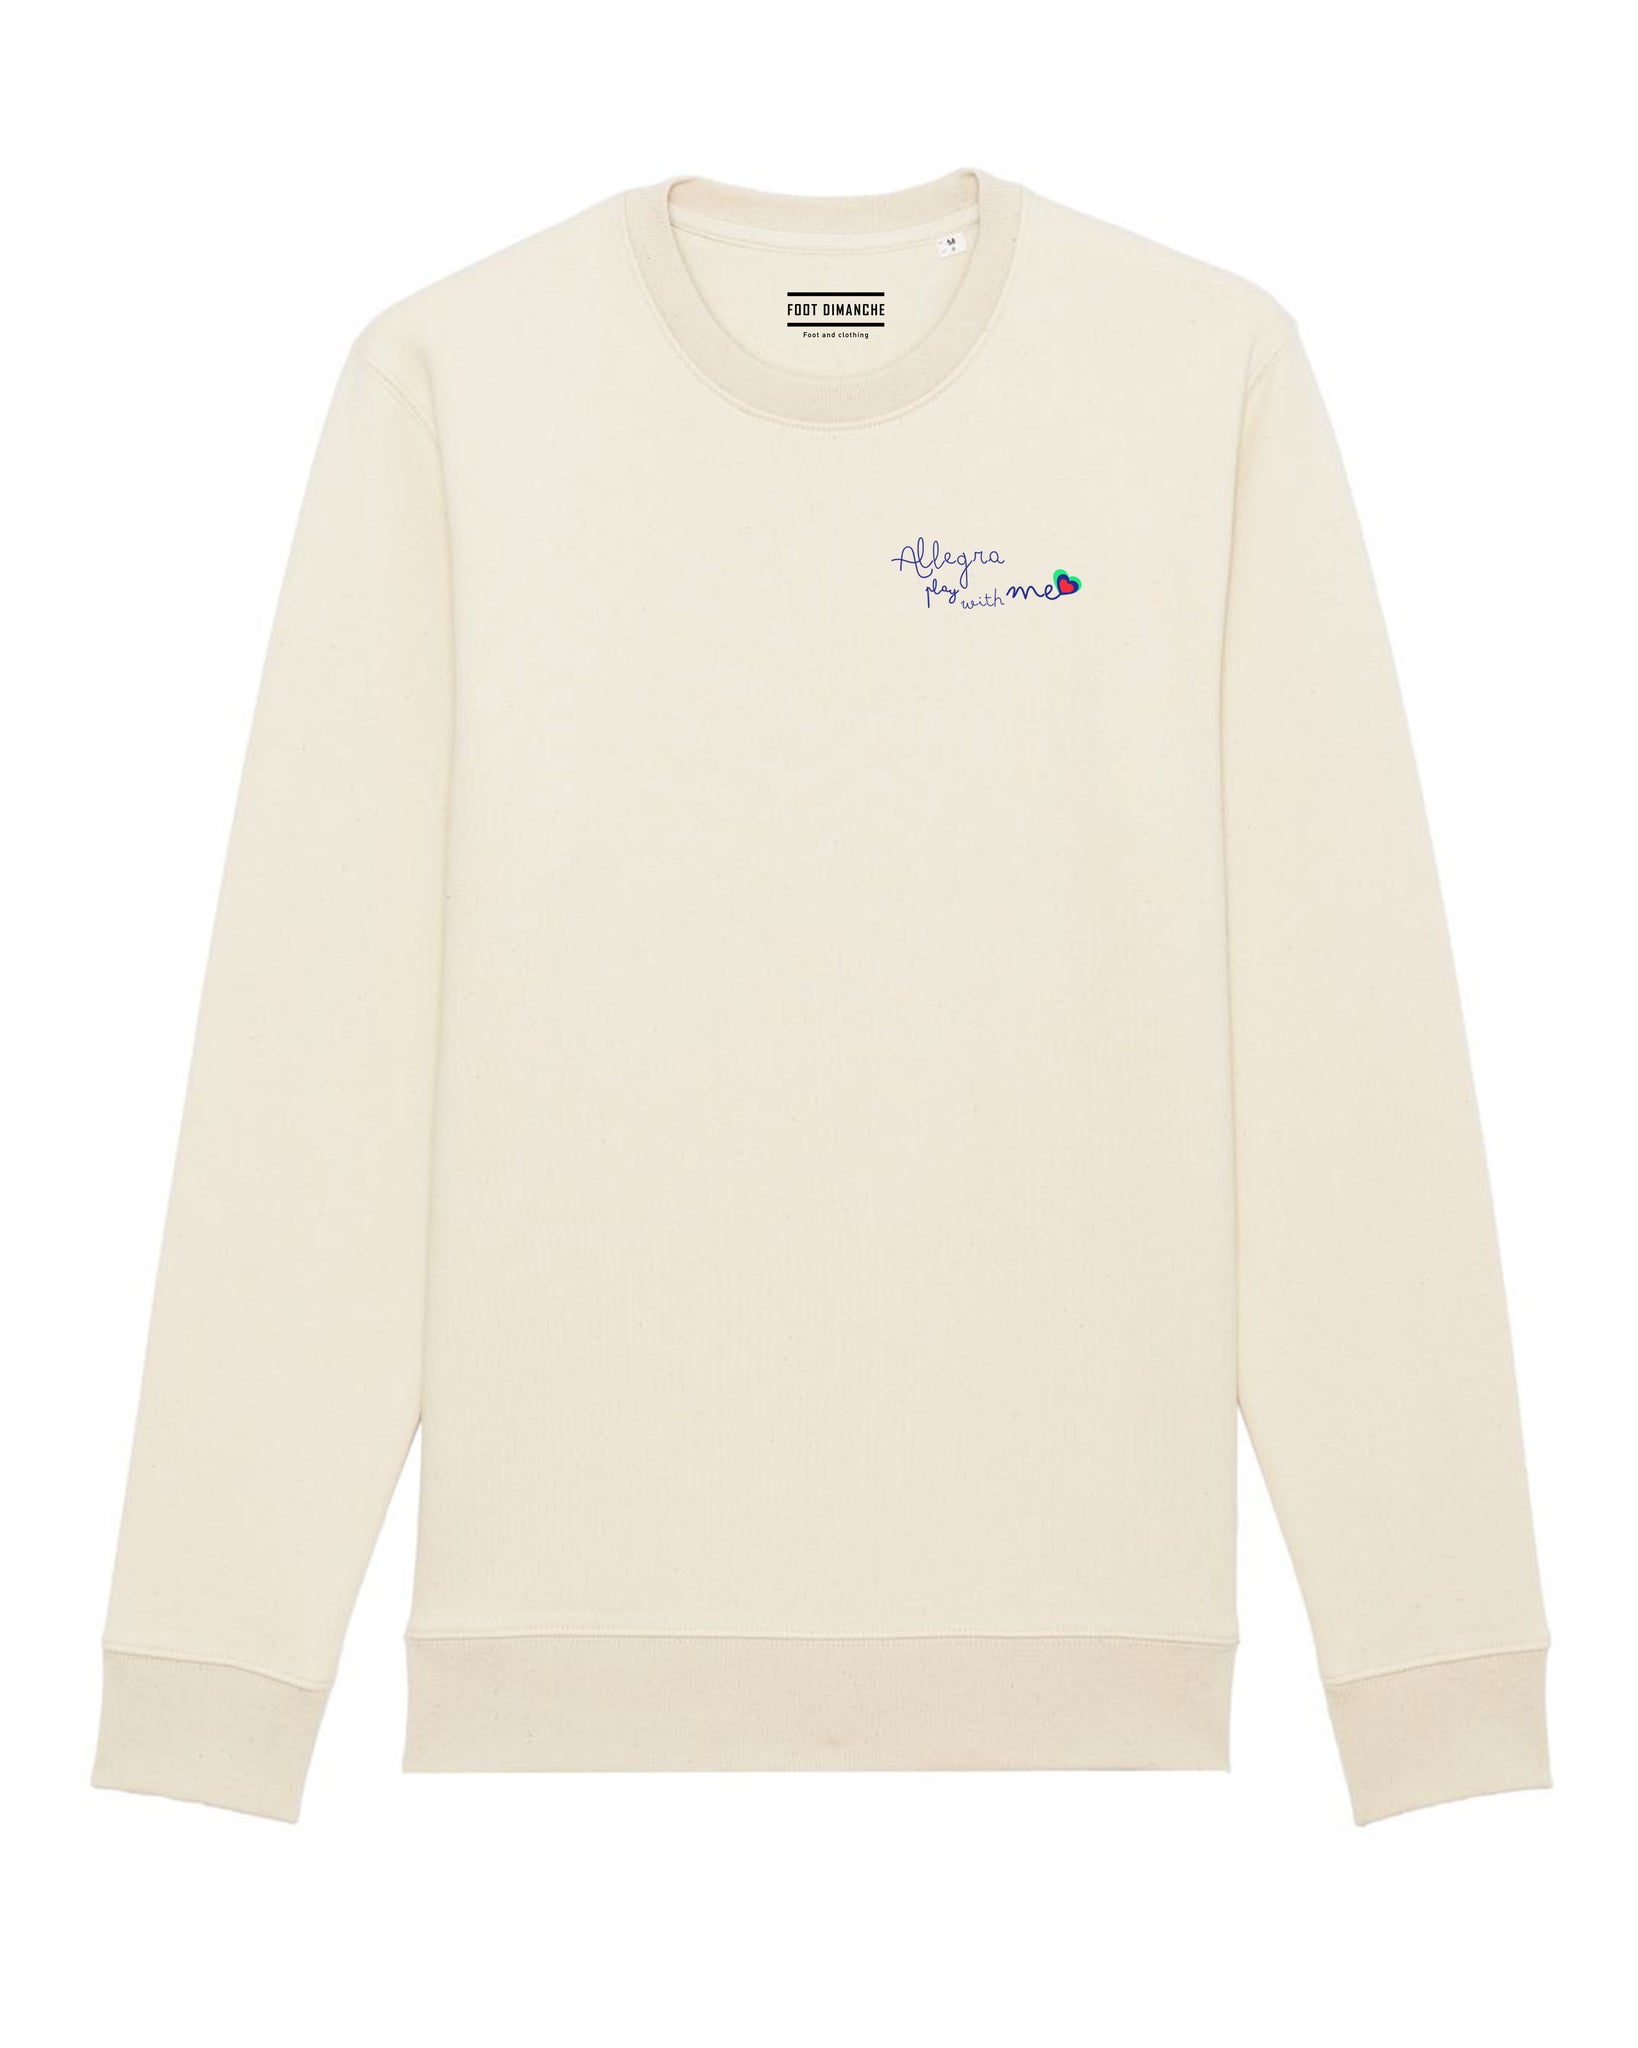 Allegra Play With Me Embroidered Sweatshirt